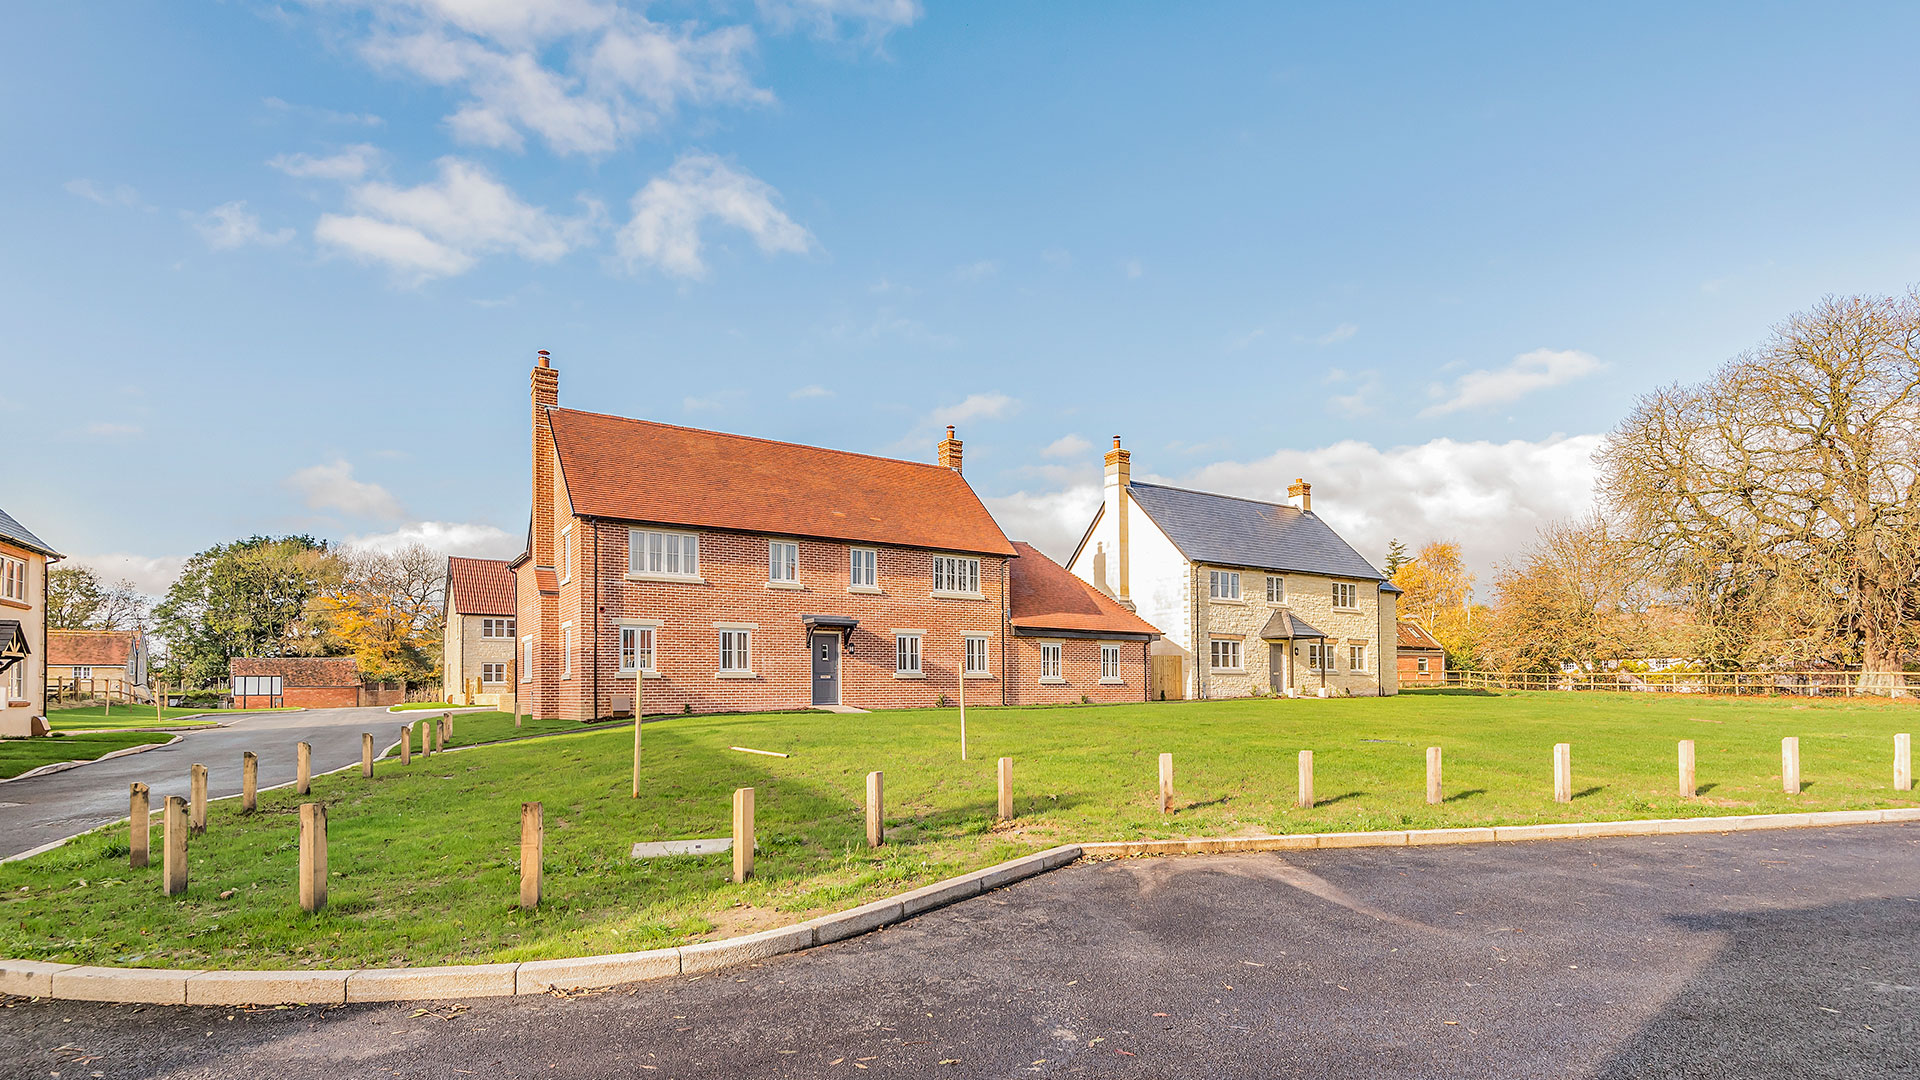 village green with new build houses behind